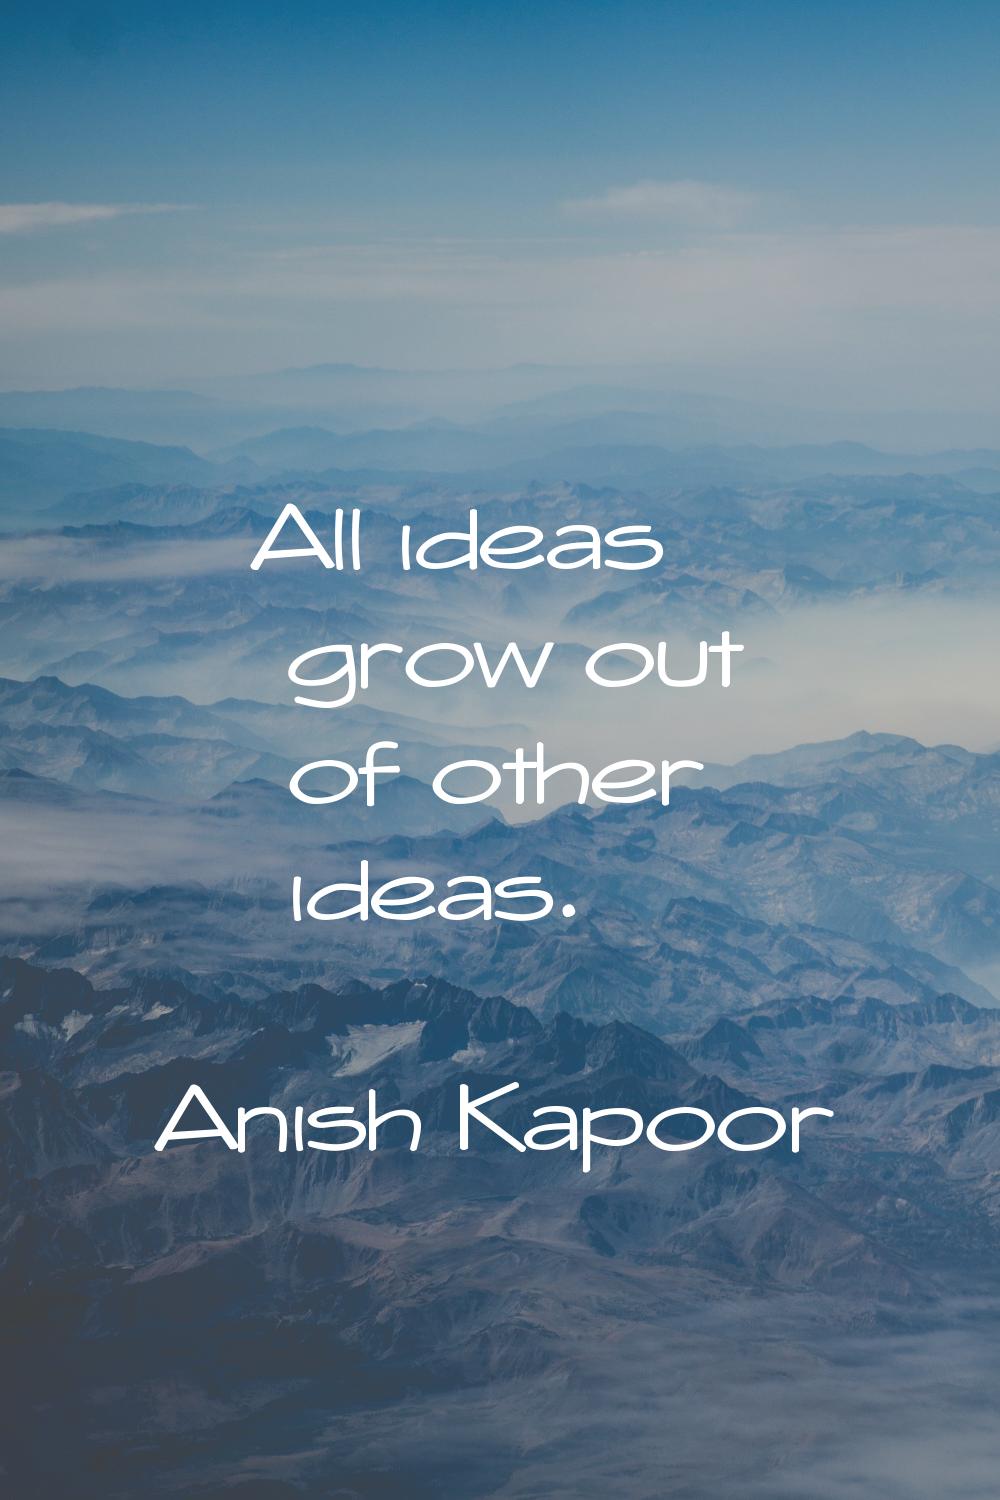 All ideas grow out of other ideas.